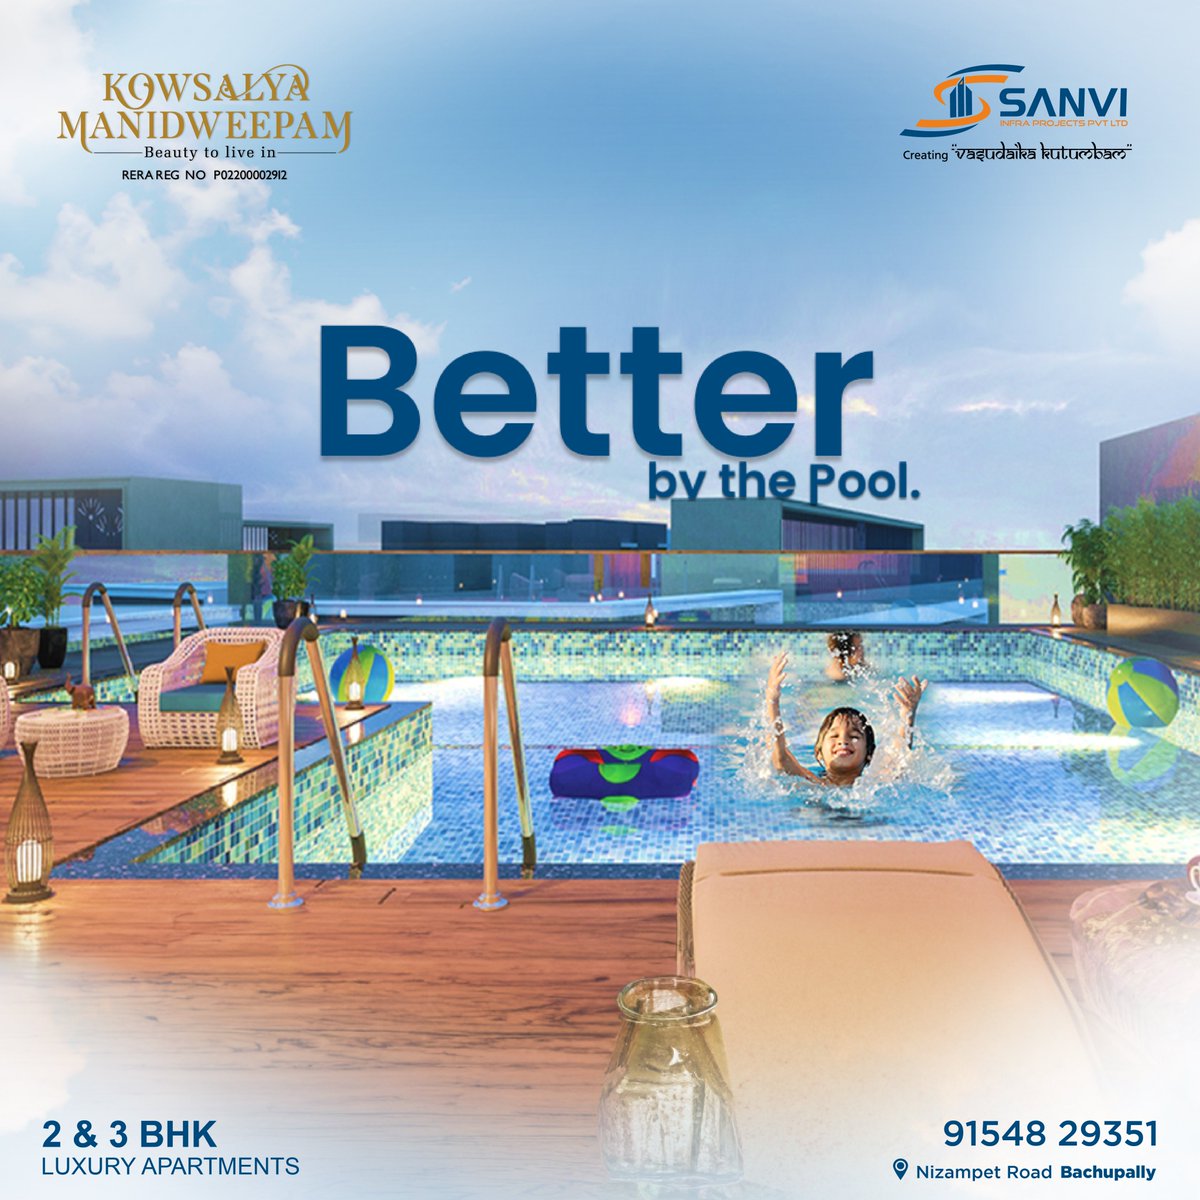 Don't drown in the sweat, dive in the waters beneath the sky. Enjoy summers at our sky view pool at Kowsalya.
.
#sanviinfra #kowsalyamanidweepam #Nizampet #Bachupally #home  #property #2and3bhkflats #2and3BHKApartments #2BHKApartments #3bhkapartments #luxuryapartments